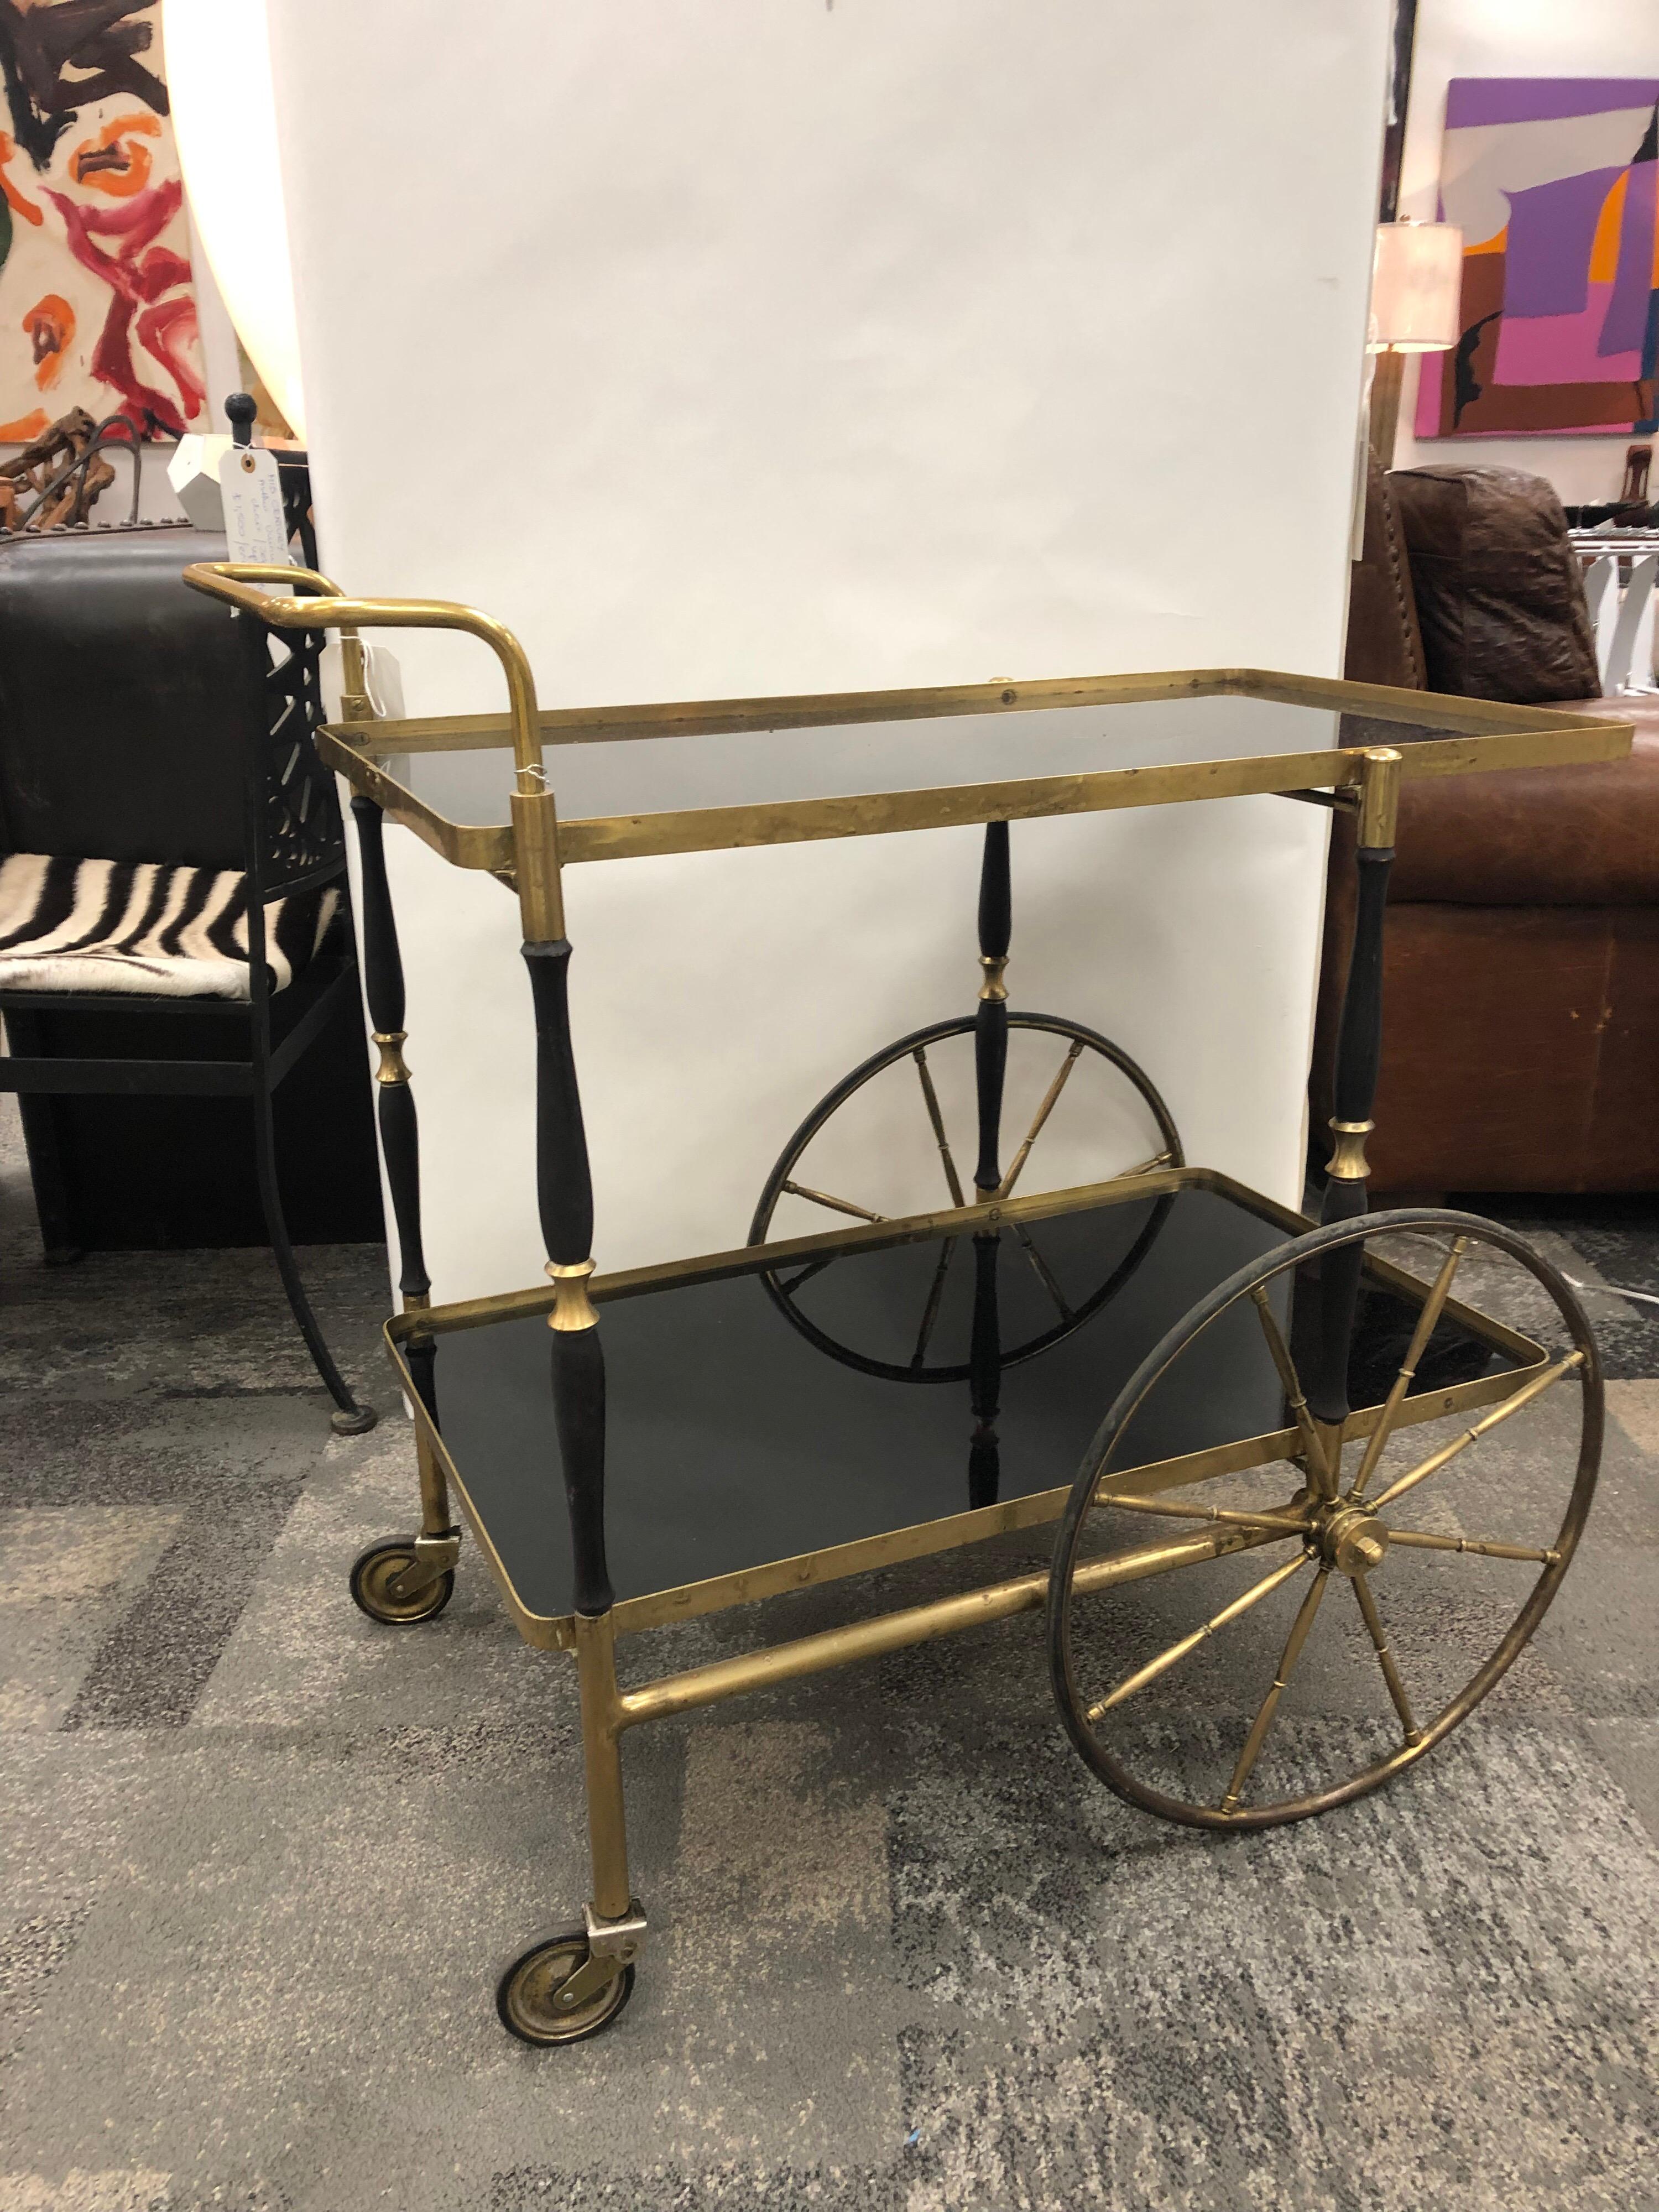 Midcentury Italian brass bar cart by Morex with black glass tops. Each top is 28.25” by 16”.